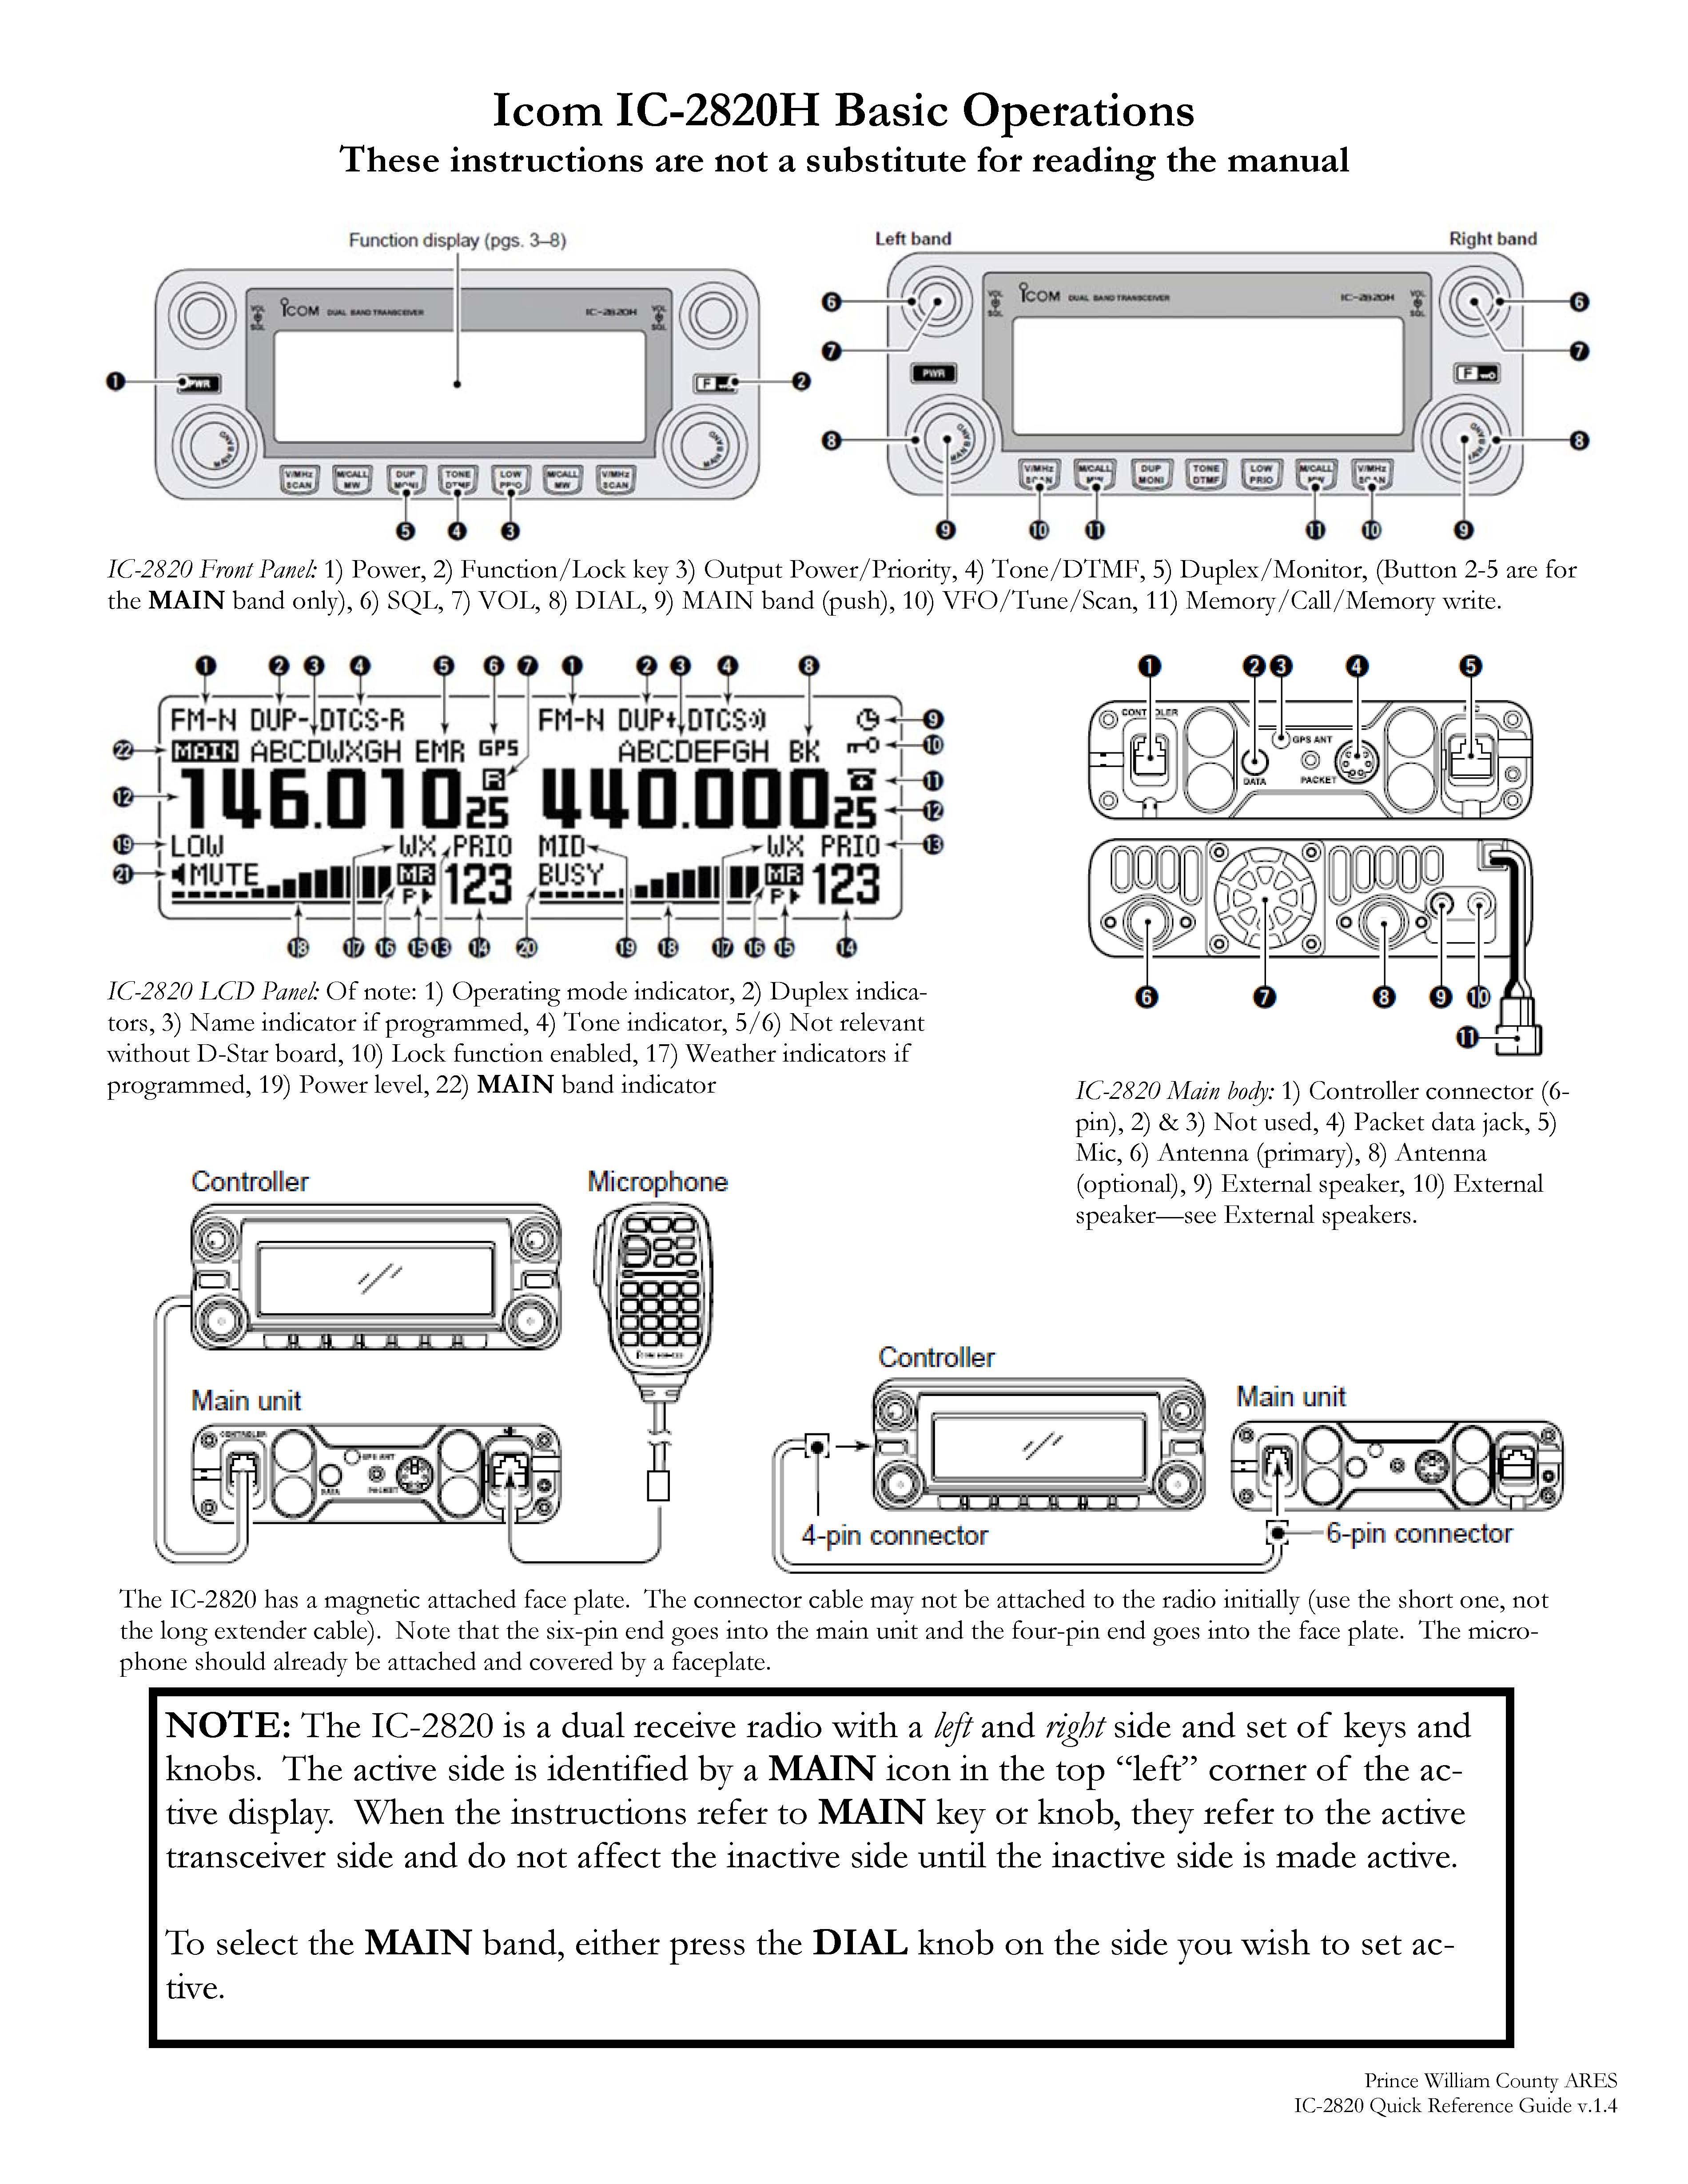 IC-2820 QRC Page 1